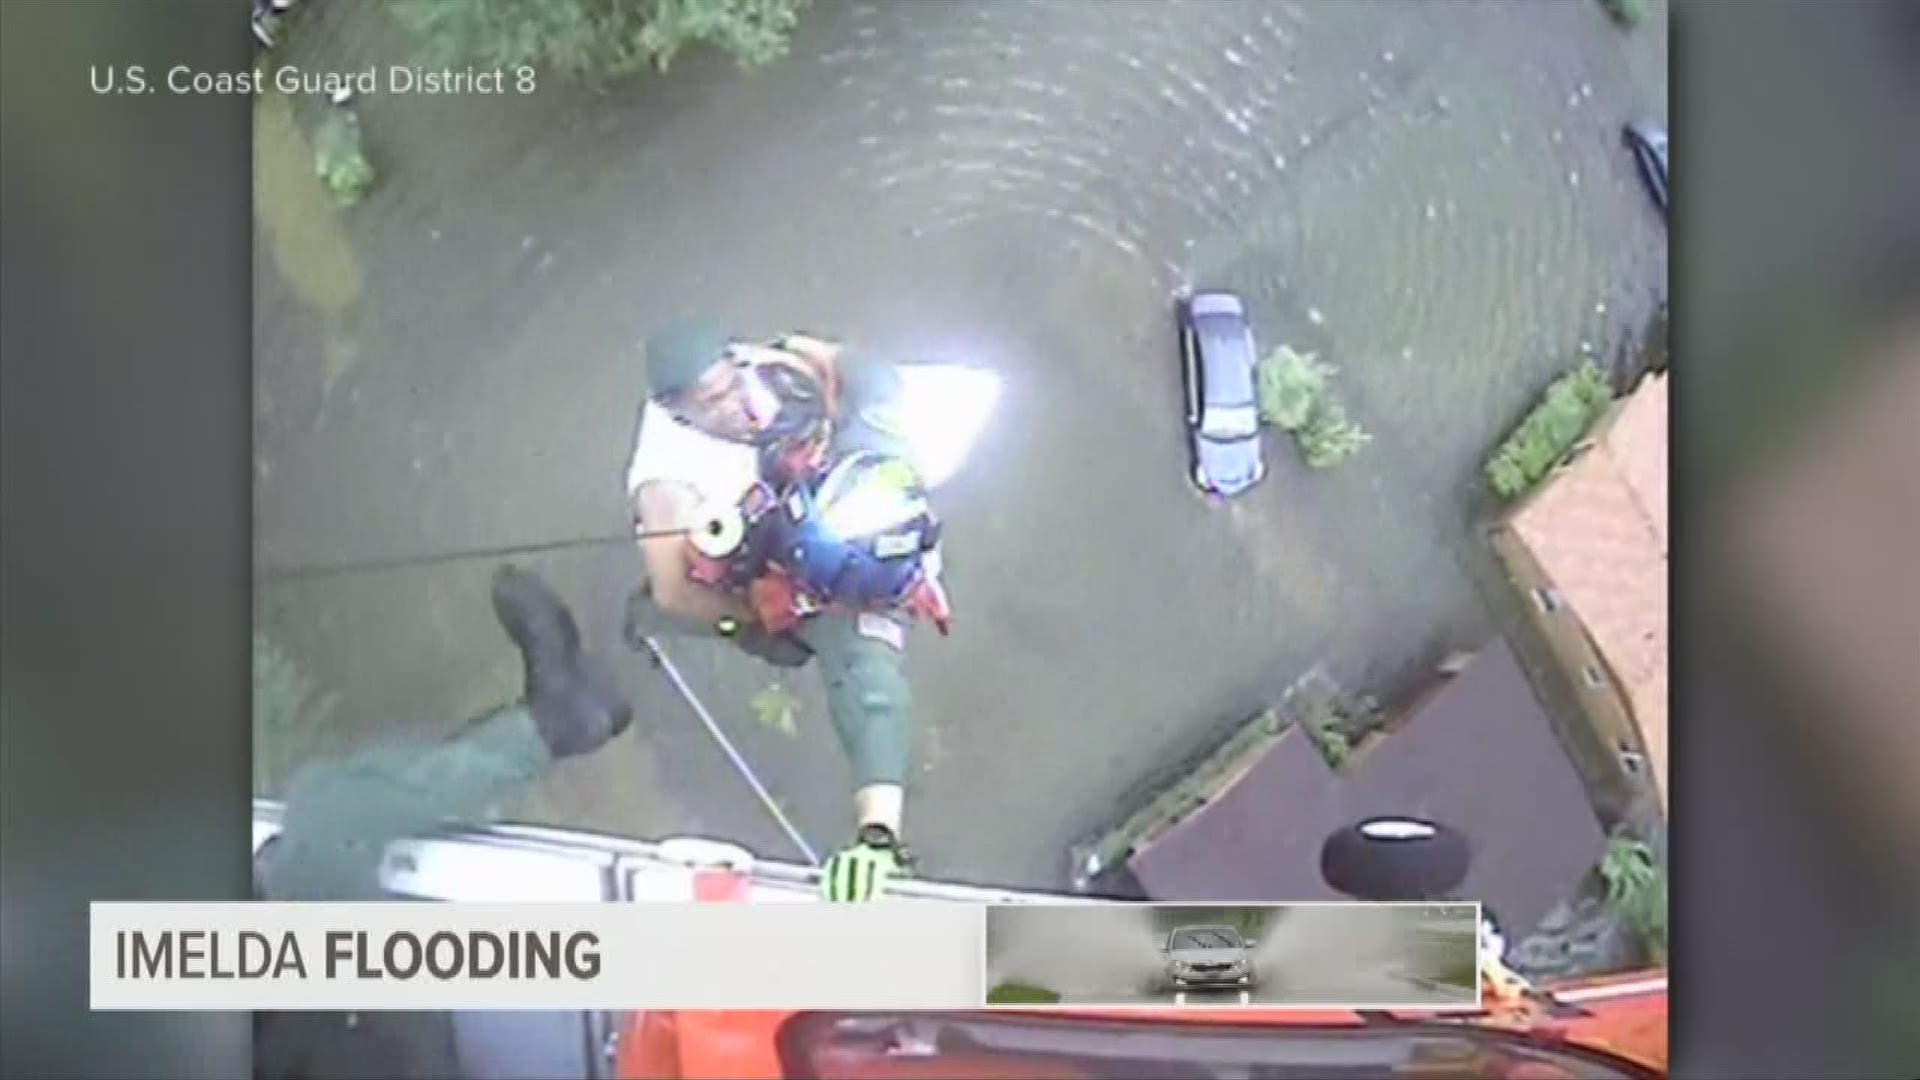 Video from the U.S. Coast Guard shows someone being hoisted into a helicopter from the flooded ground below.